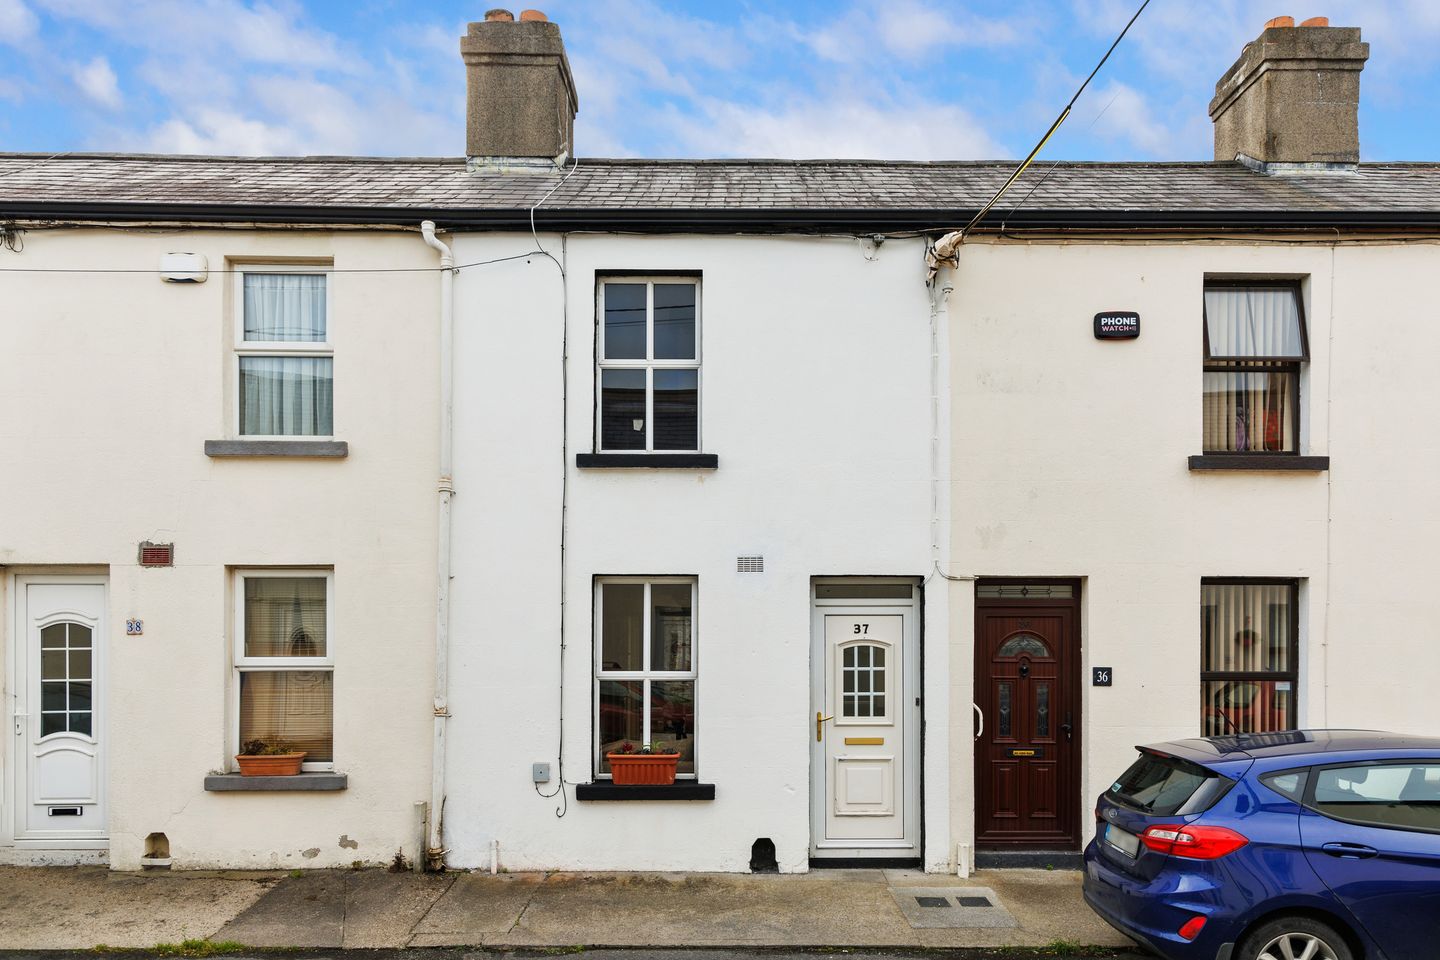 37 Saint Kevin's Square, Bray, Co. Wicklow, A98AY61